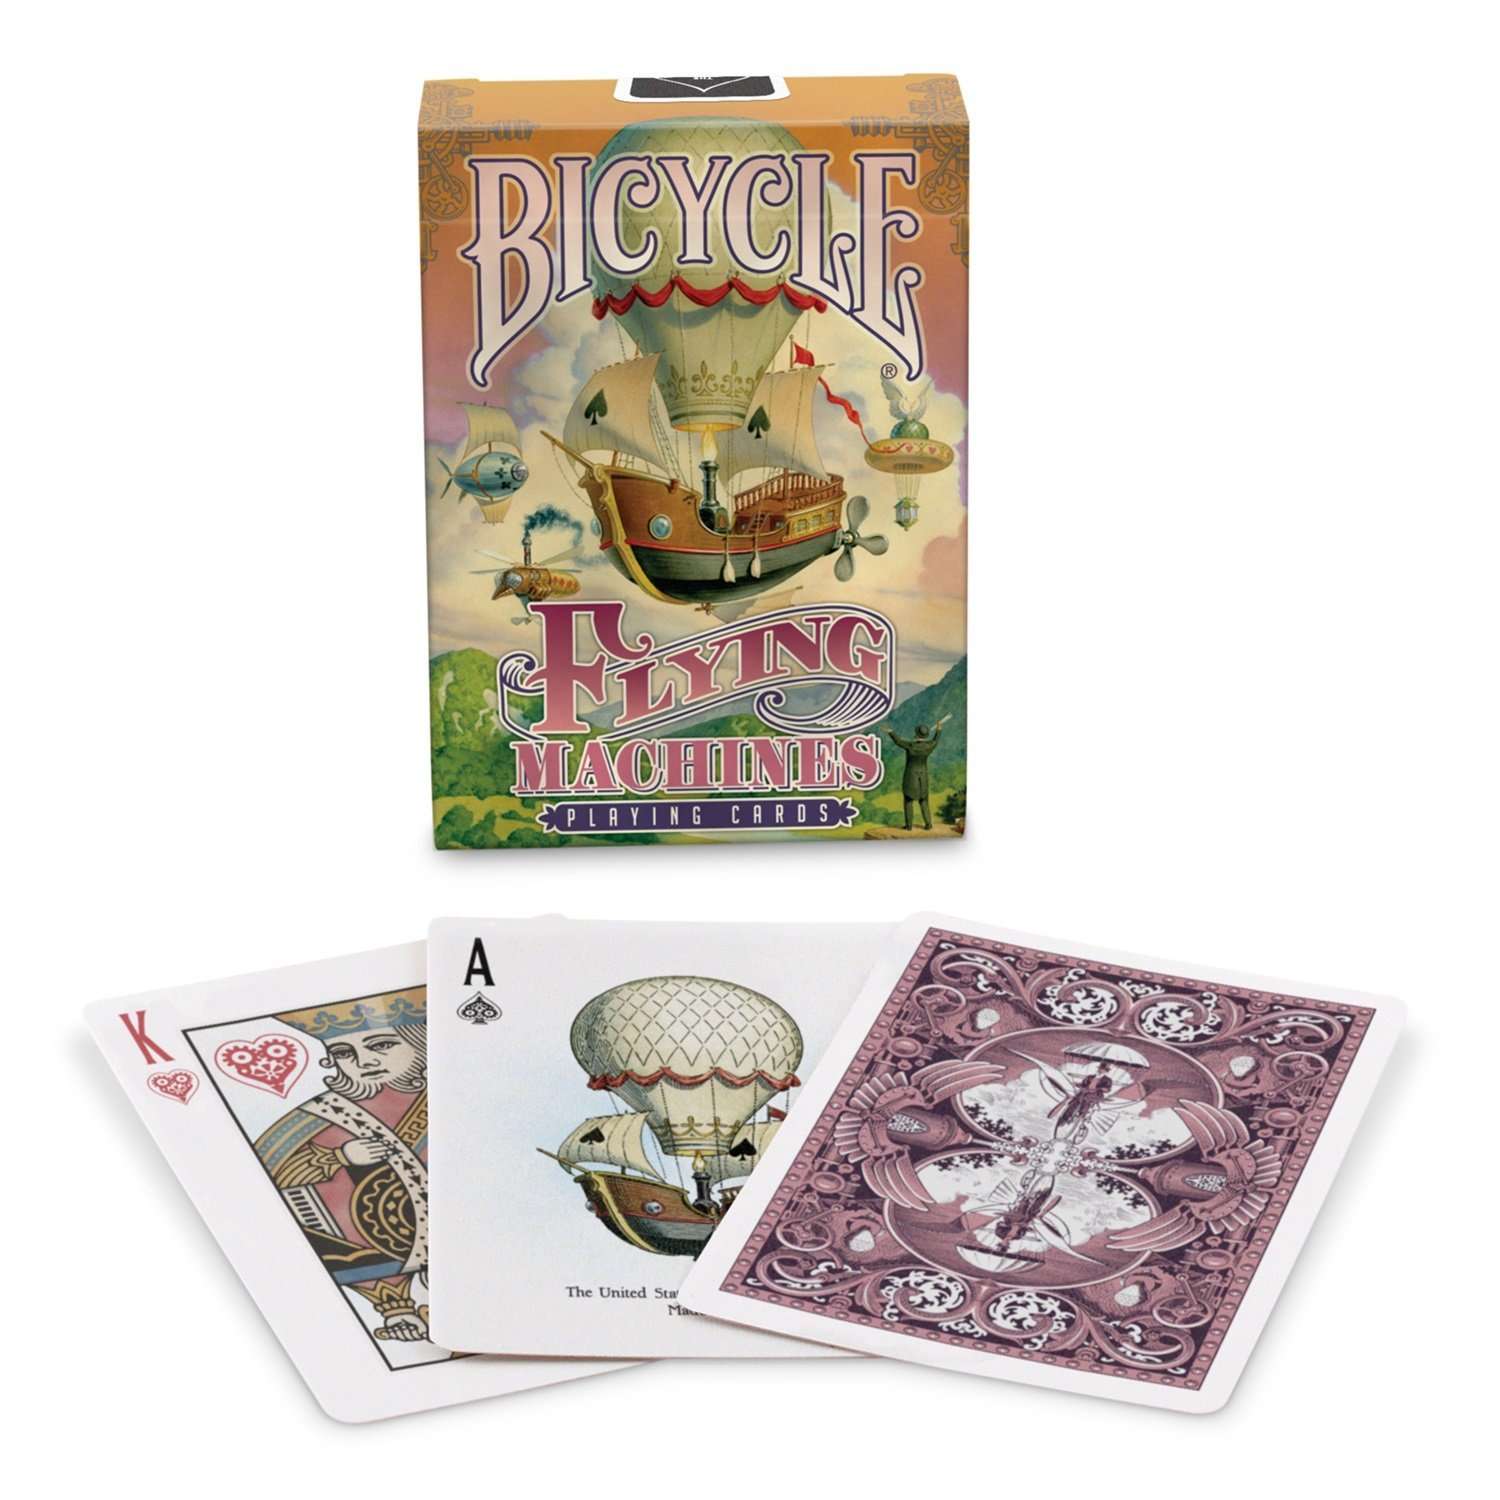 PlayingCardDecks.com-Flying Machines Red Bicycle Playing Cards